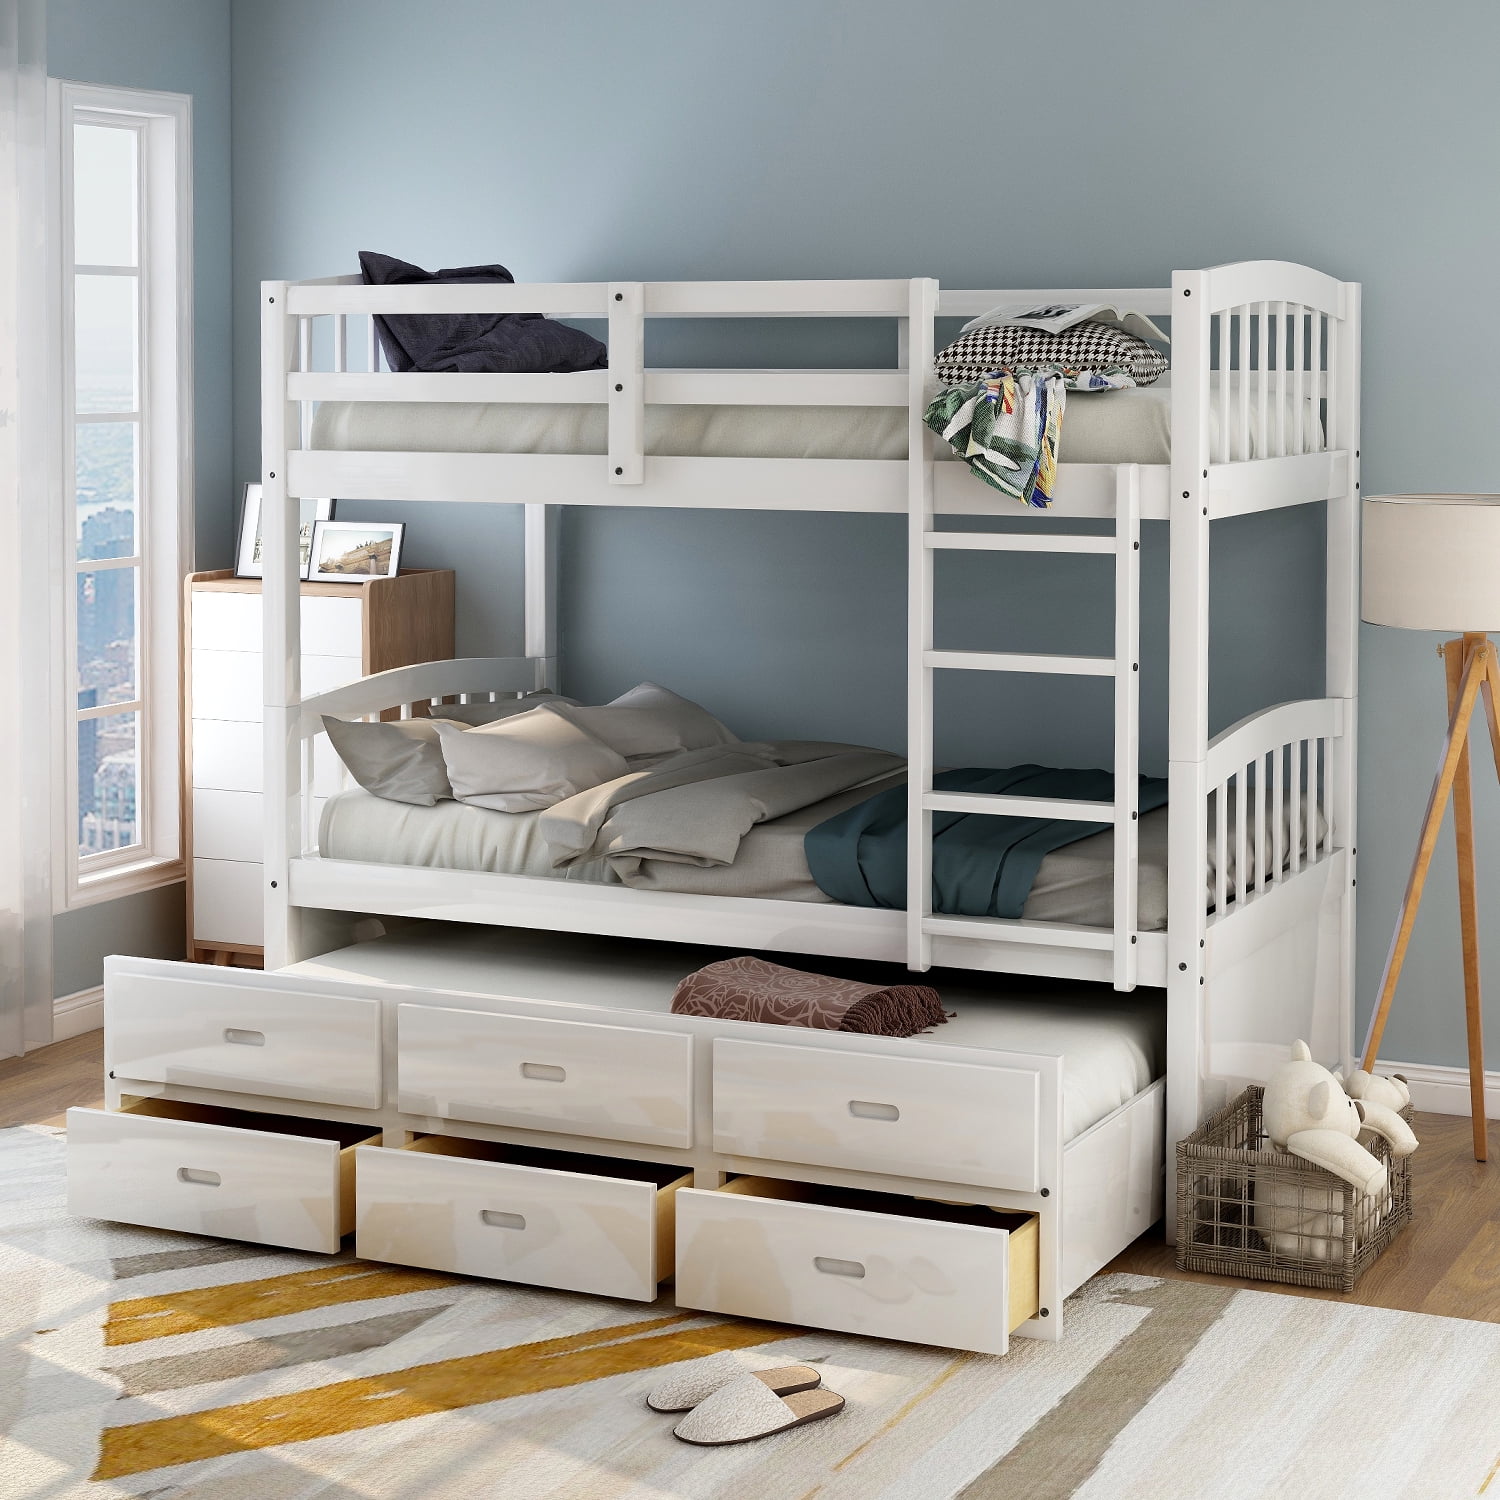 Euroco Twin Over Wood Bunk Bed, Twin Bunk Bed With Trundle